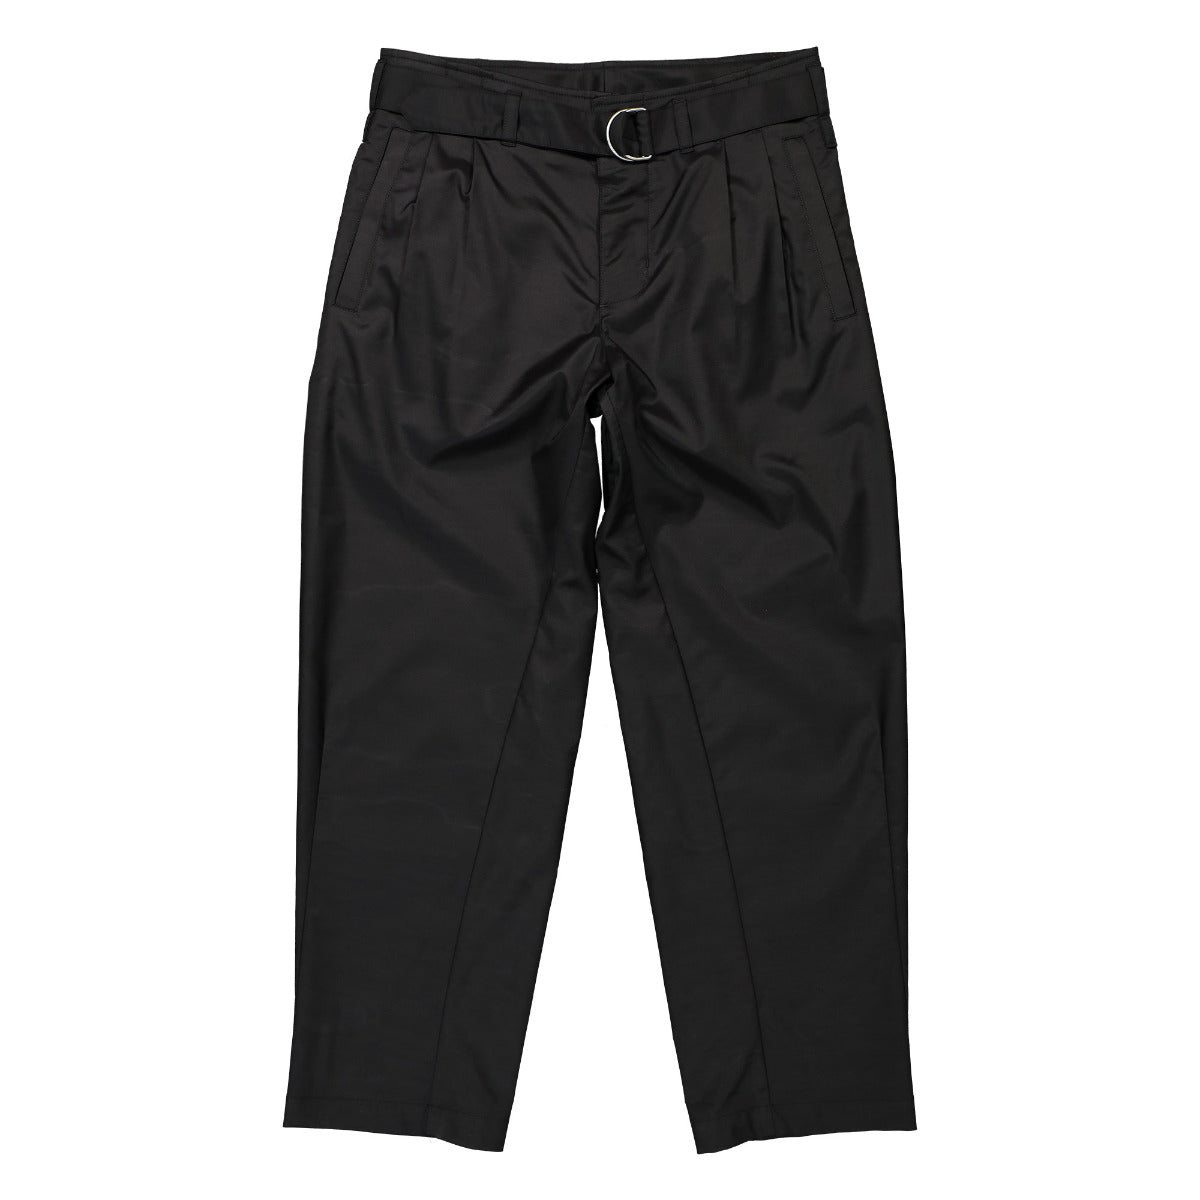 ESC Workers Pant